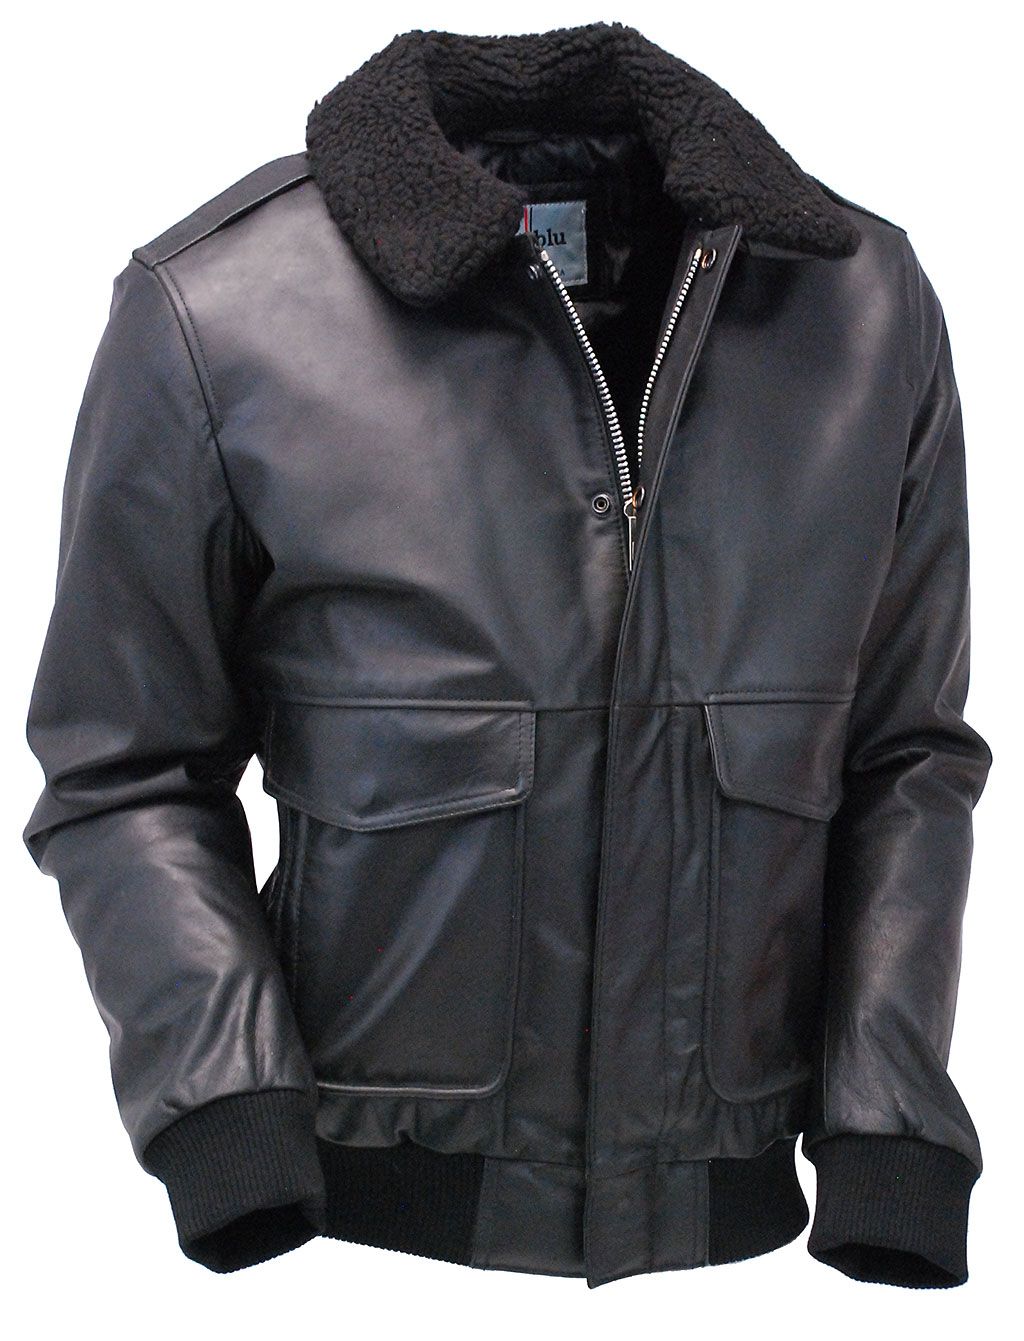 Black leather bomber jacket with removable collar in a classic A2 bomber style.